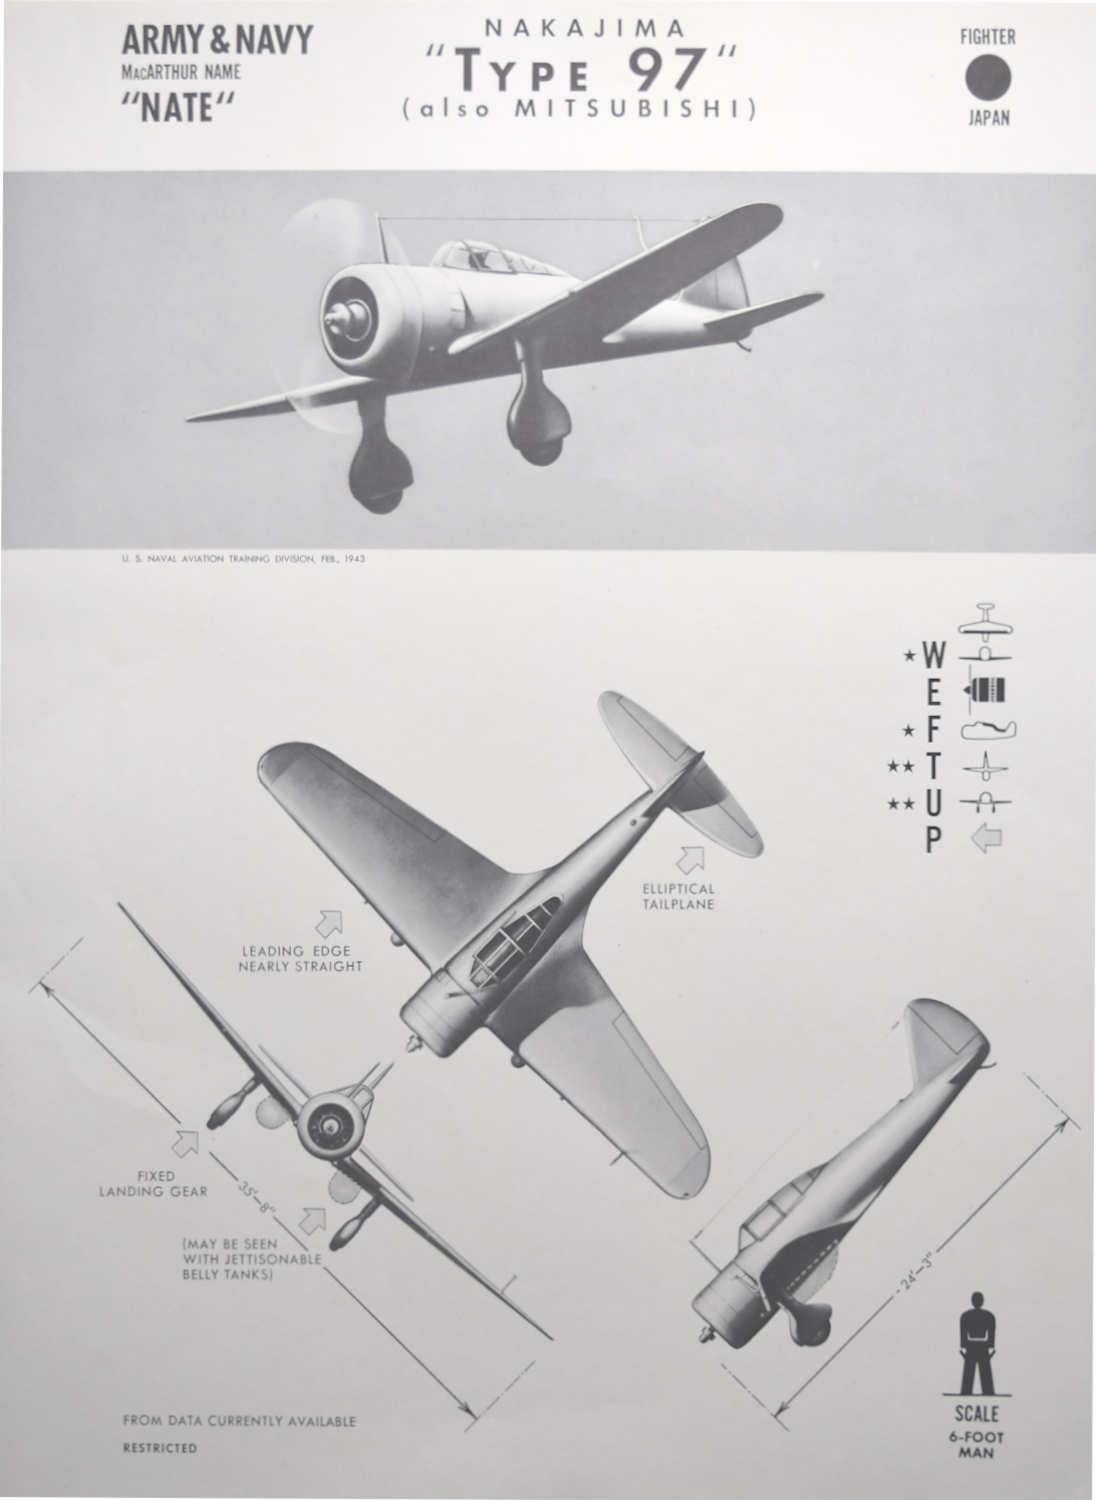 1943 Nakajima "Nate" "Type 97" Japanese fighter plane identification poster WW2 - Print by Unknown